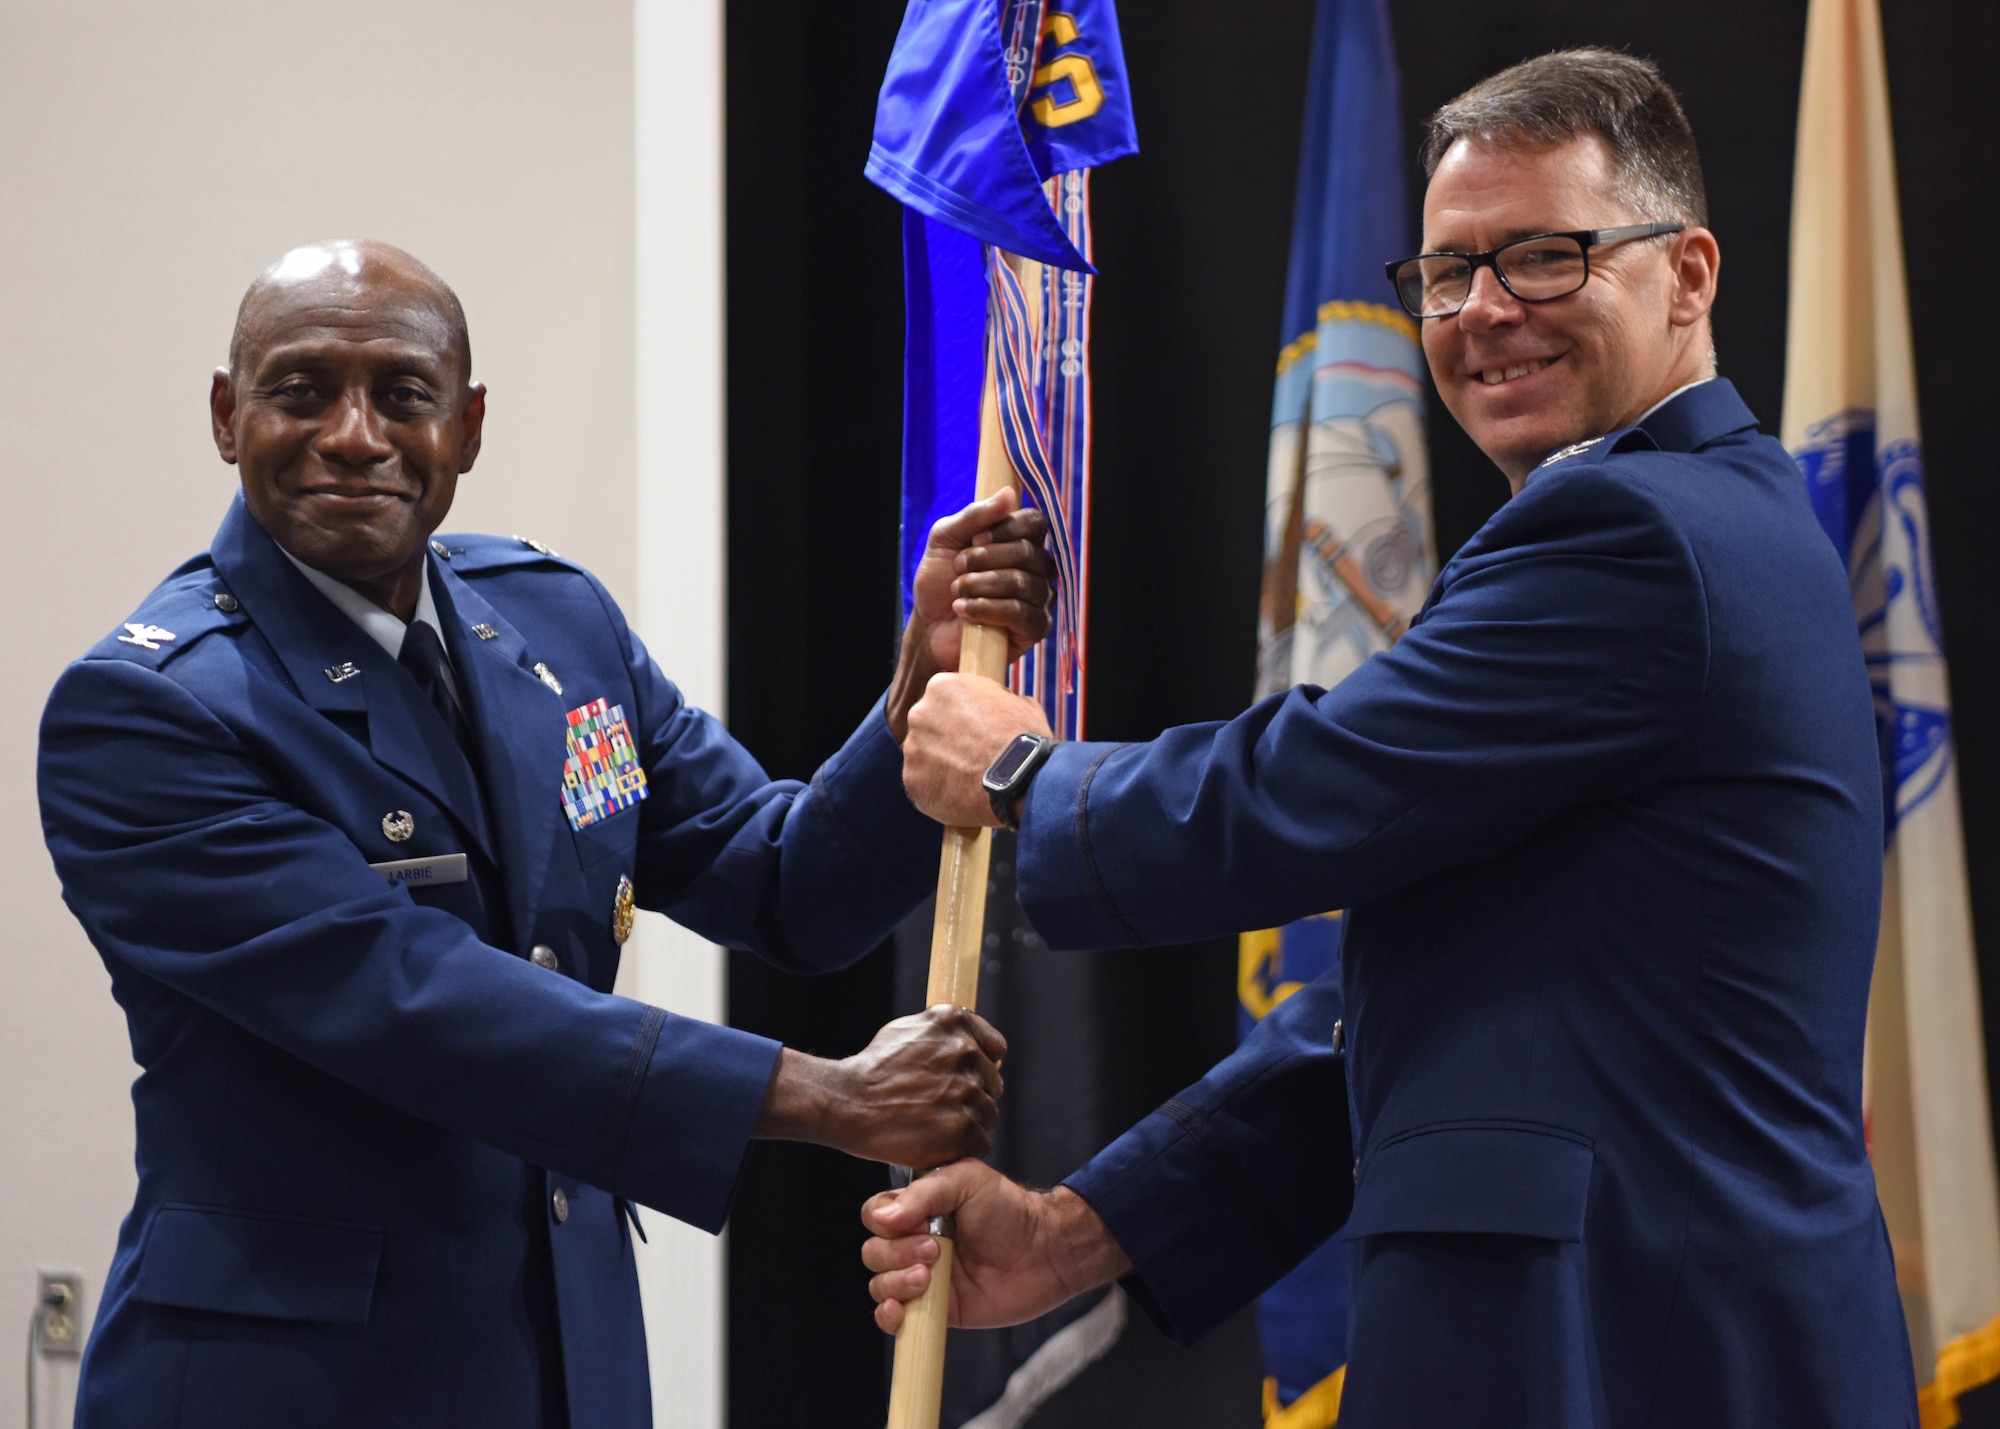 U.S. Air Force Col. Roy Louque, 17th Operational Medical Readiness Squadron outgoing commander, (right) relinquishes command to Col. Derek Larbie, 17th Medical Group commander, during the 17th OMRS change of command ceremony at the Powell Event Center, June 2, 2022. Passing the guidon physically represents the symbolism of passing the squadron responsibilities to the next commander. (U.S. Air Force photo by Senior Airman Ethan Sherwood)